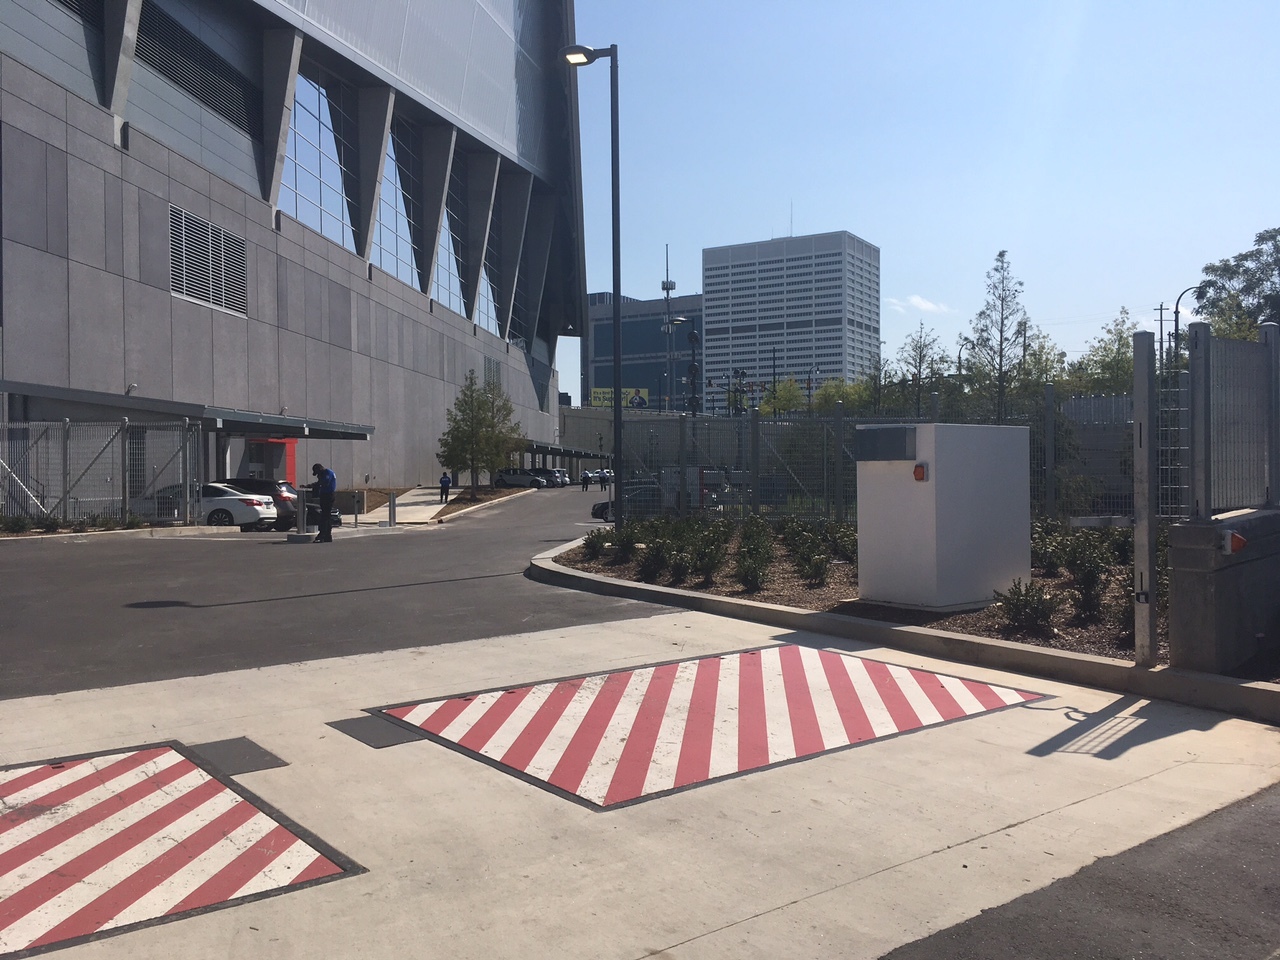 Larger Barriers Outside Of Mercedes-Benz Stadium